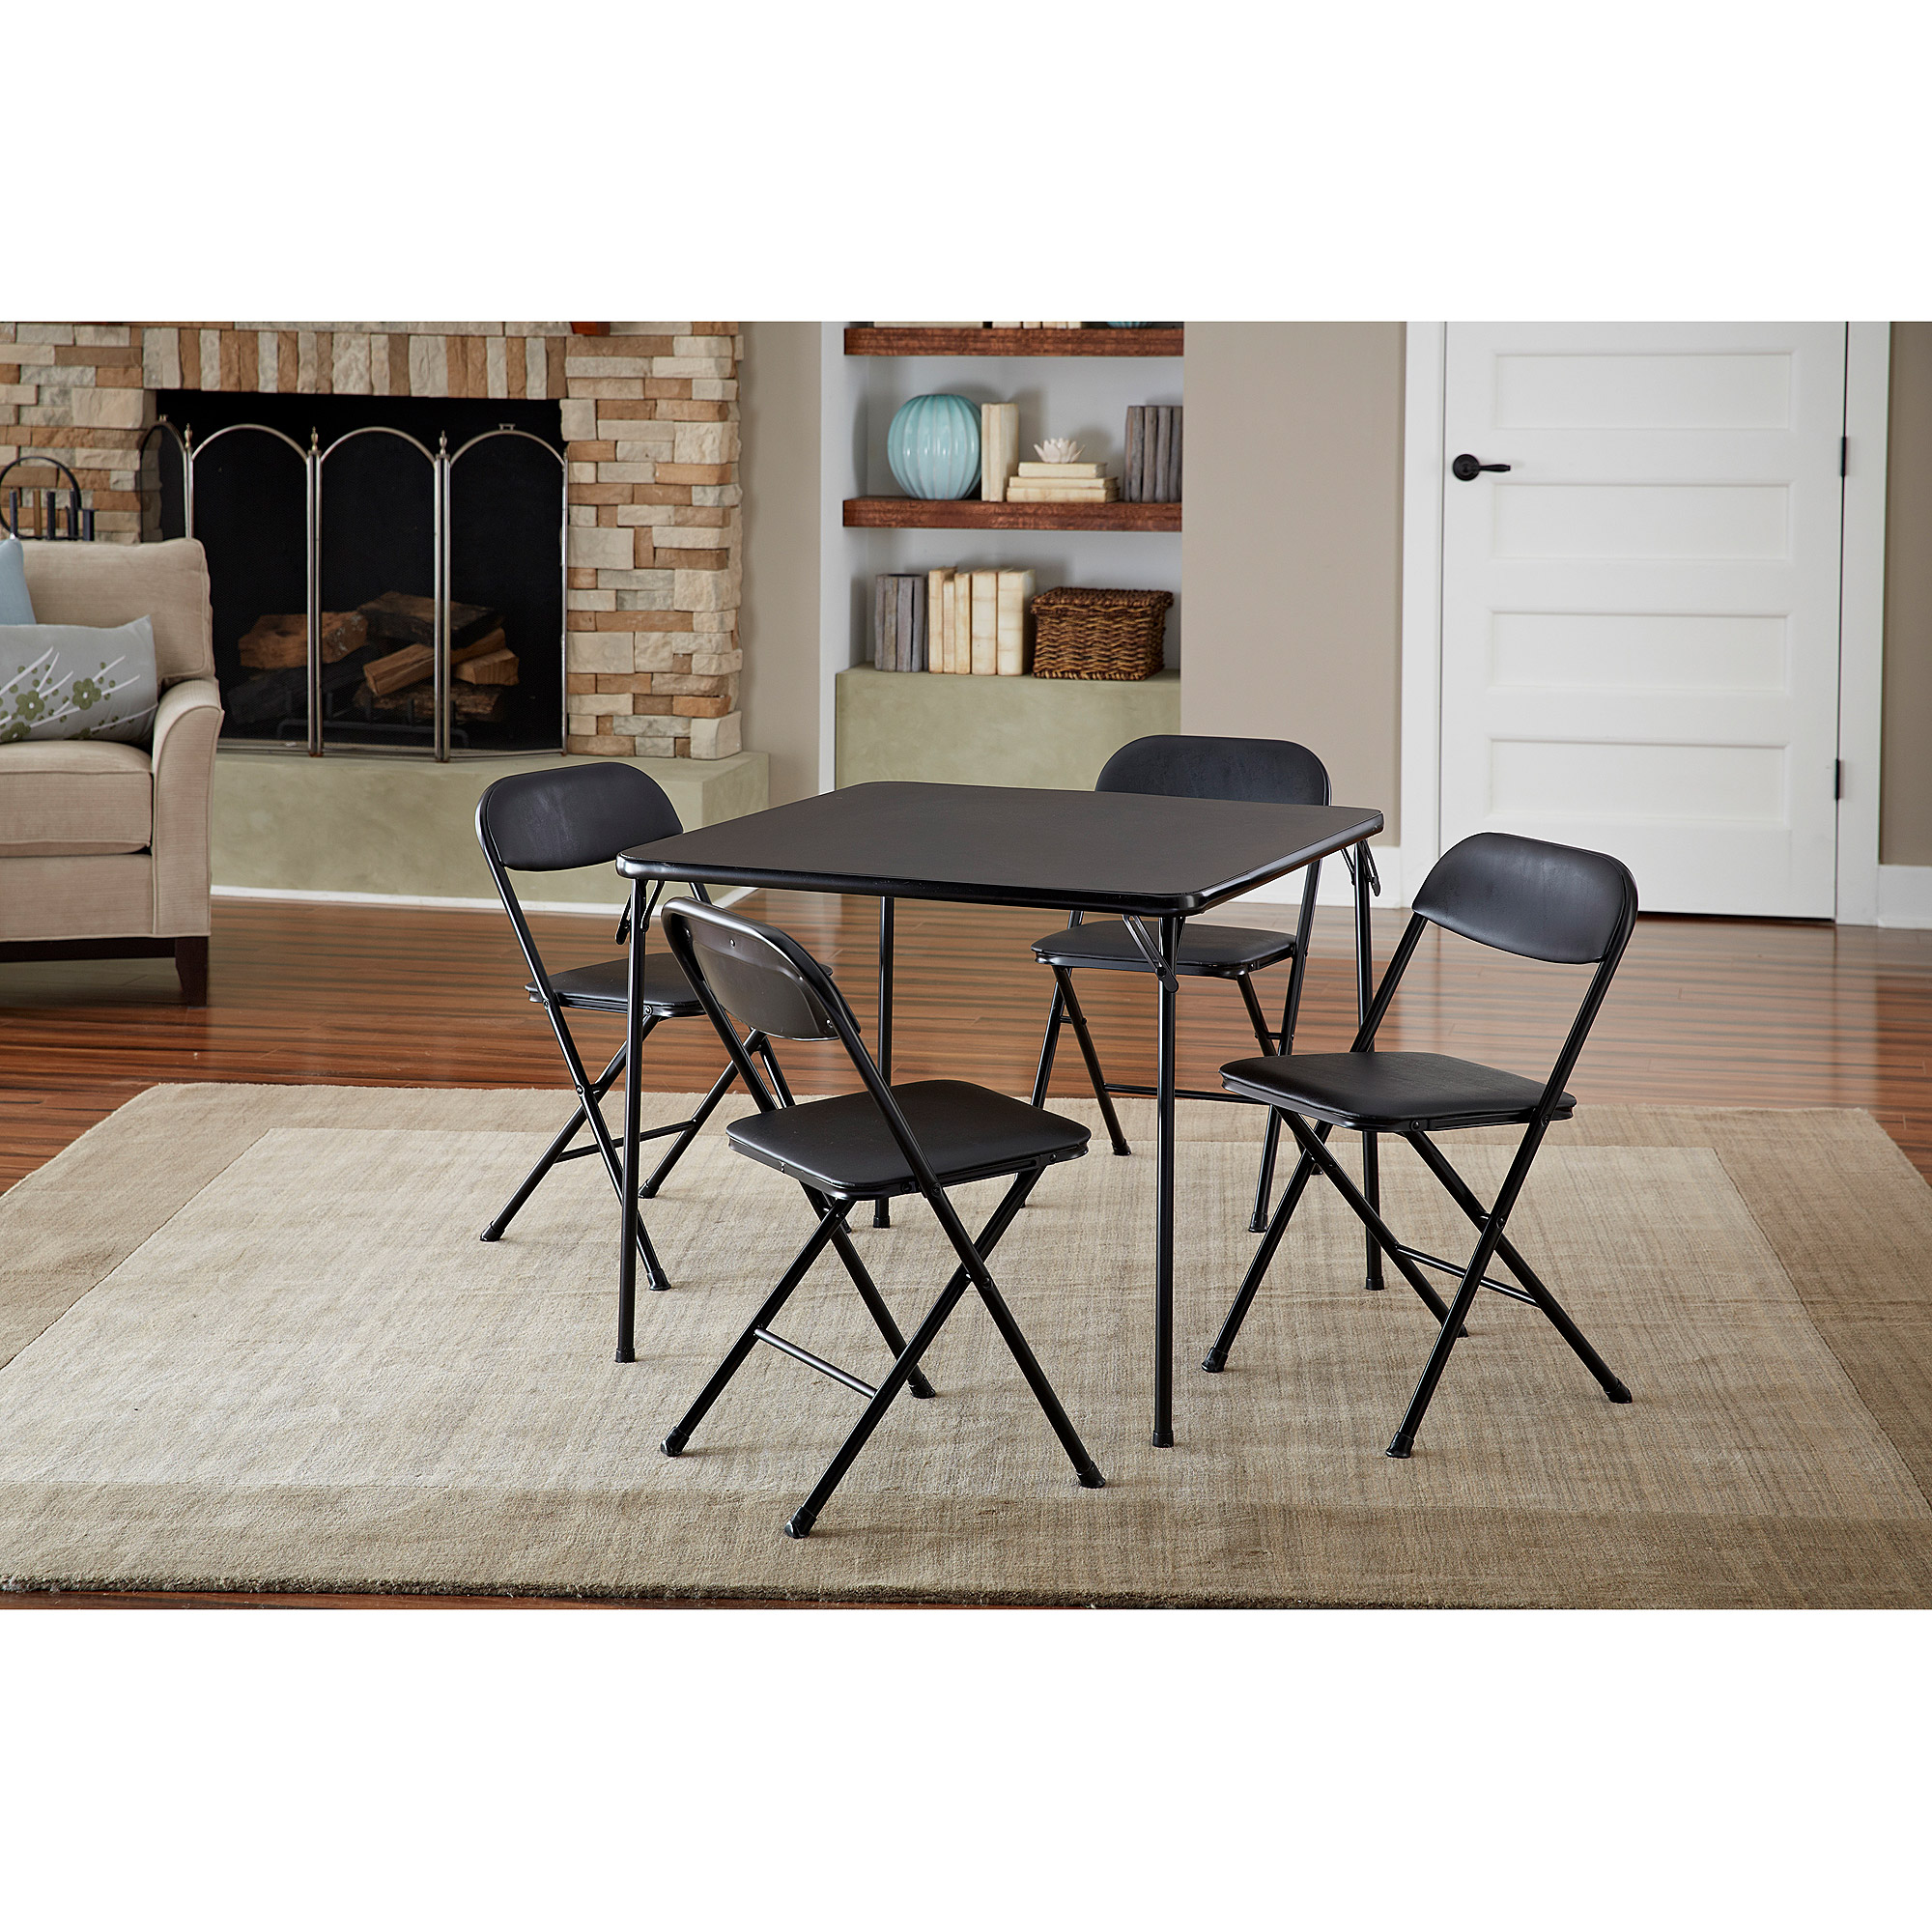 Cosco 5-Piece Card Table Set, Black - image 2 of 7